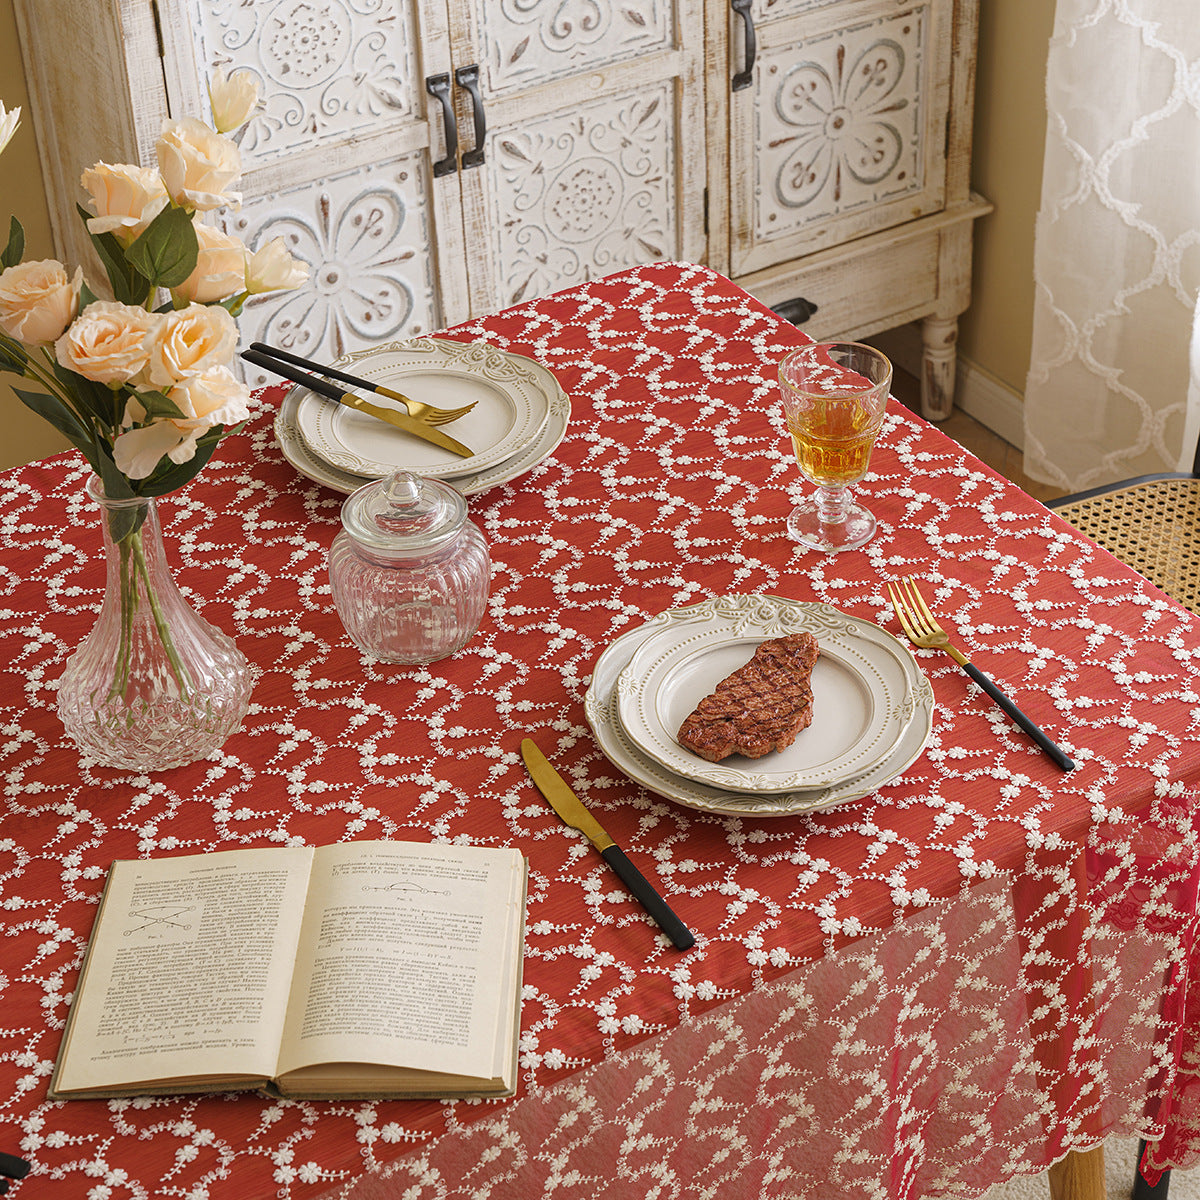 Bulk Red Lace Tablecloth Embroidered Floral Table Cover for Party Home Decor Wholesale